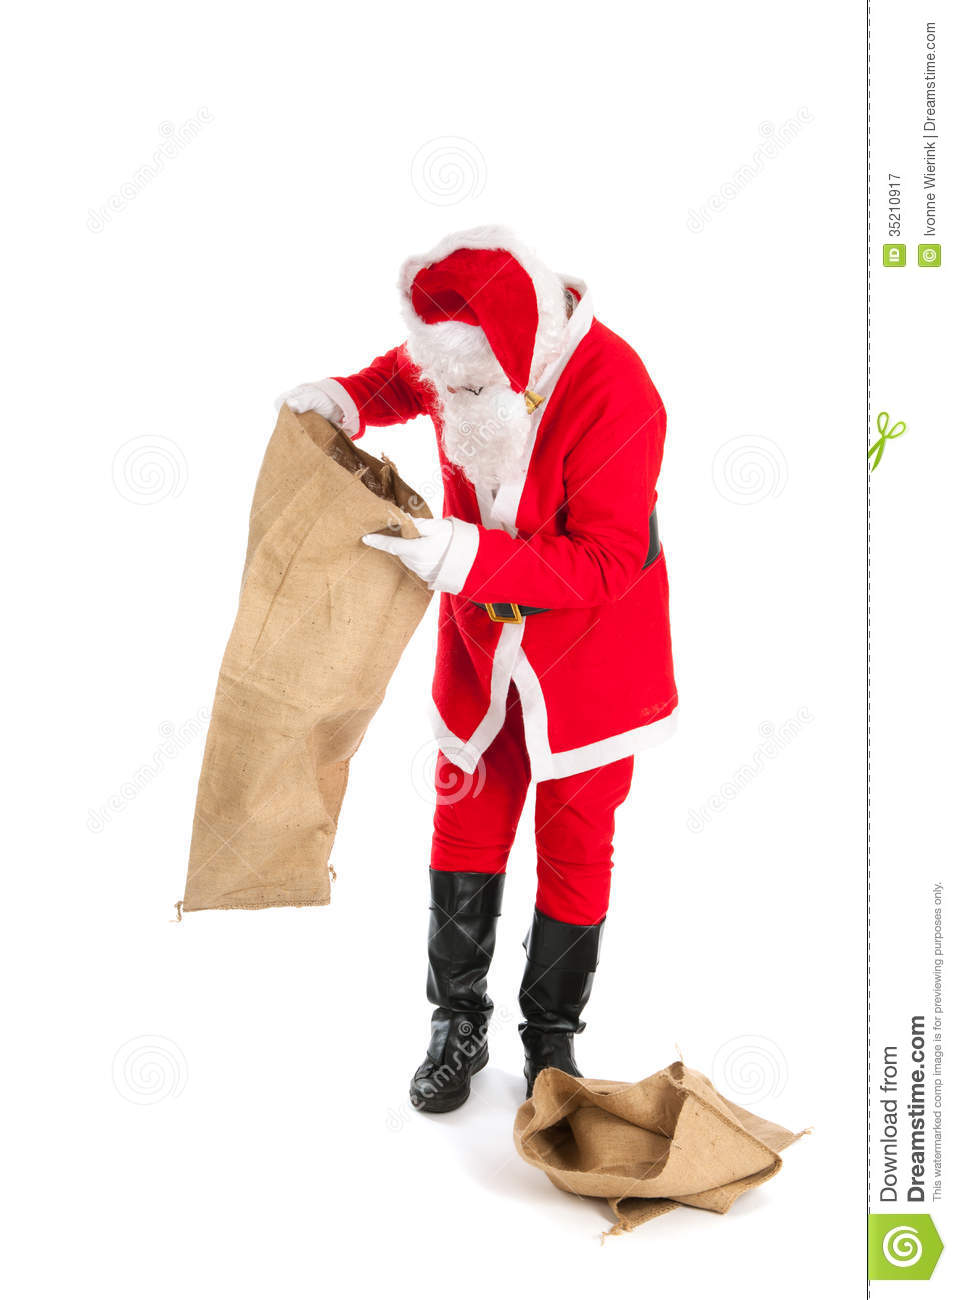 Santa With Empty Bags Royalty Free Stock Photography   Image  35210917